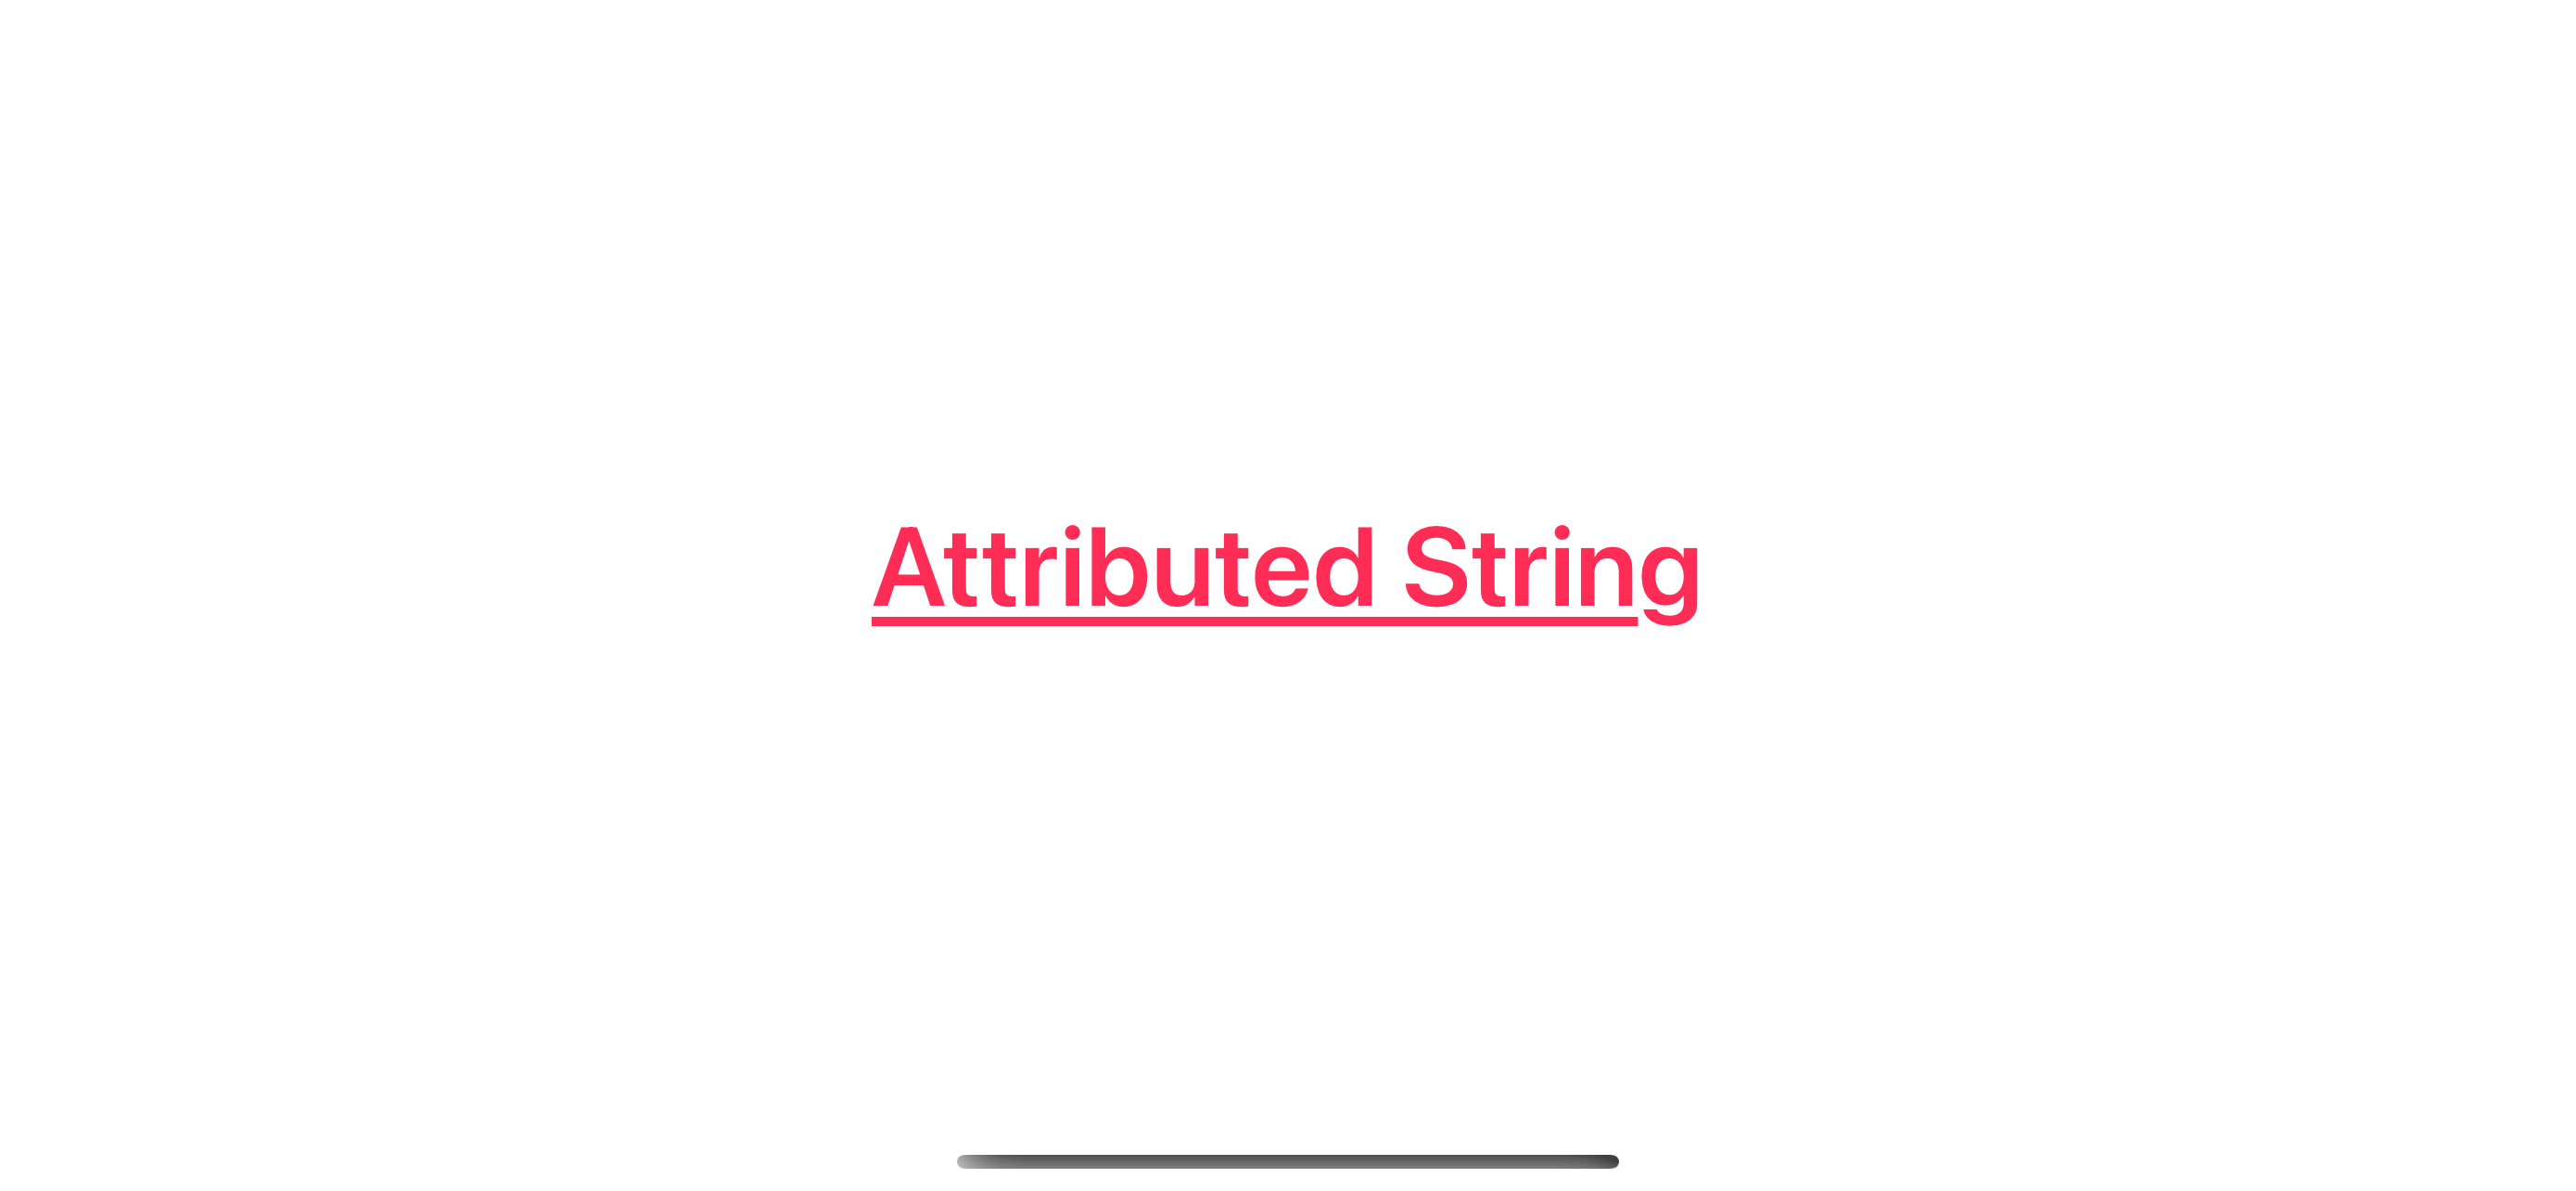 An example of attributed string.